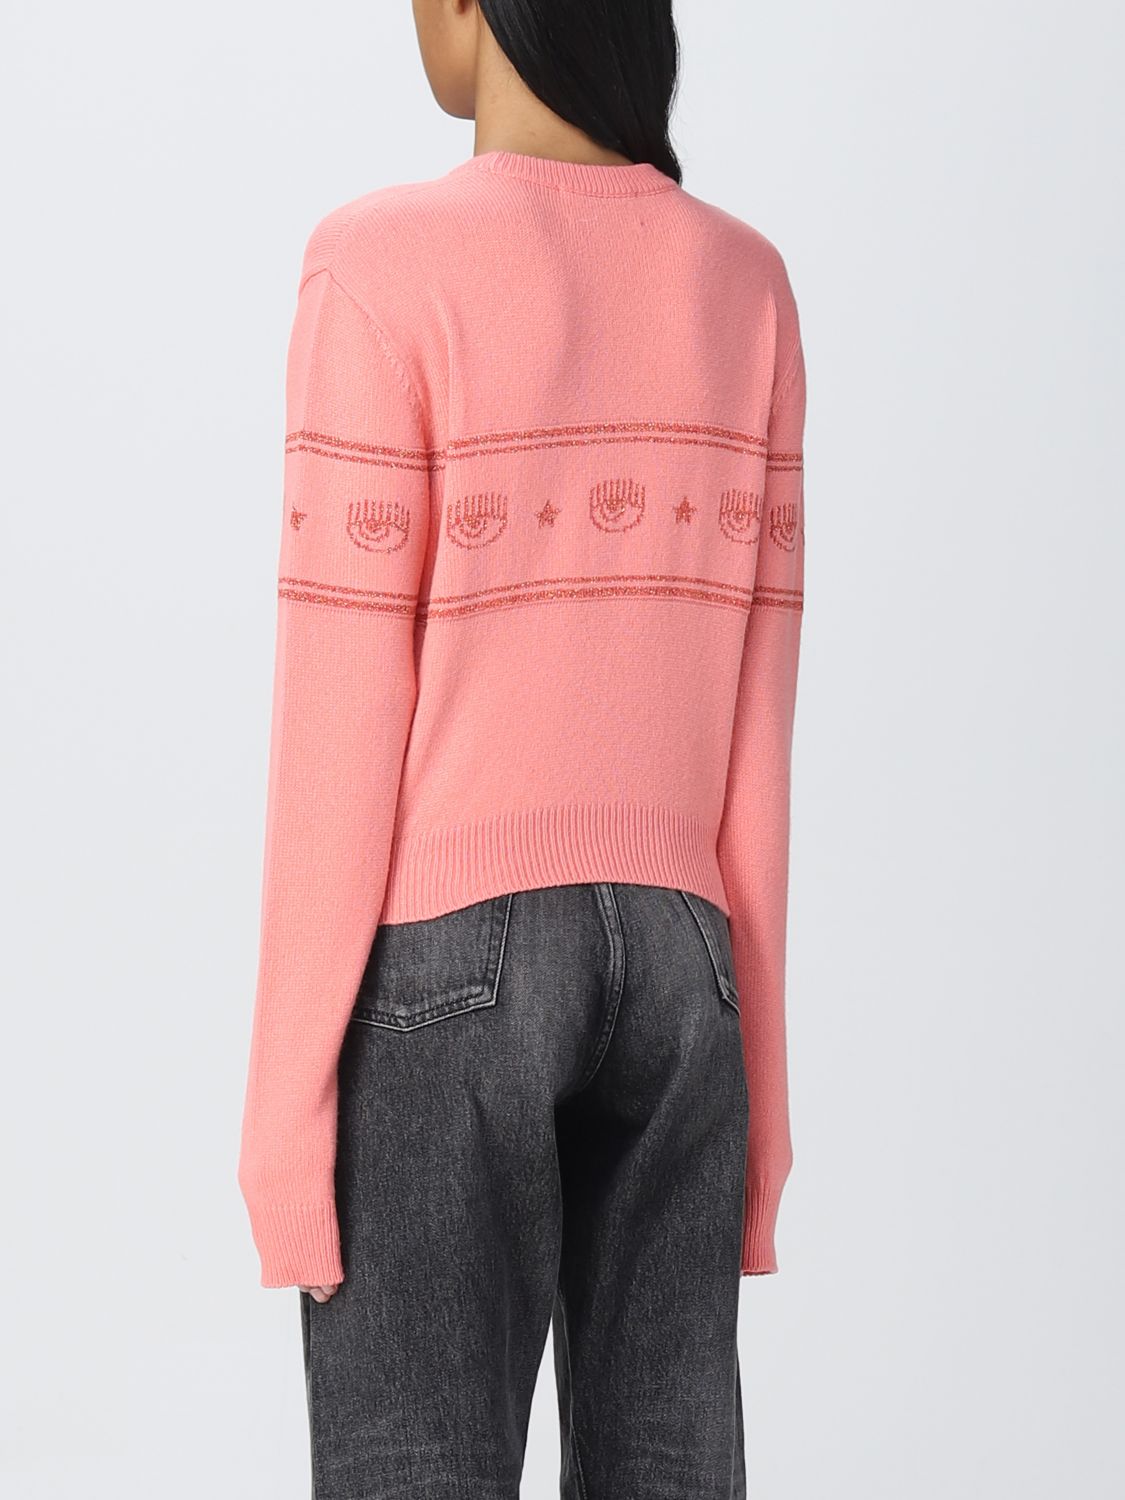 Sweater Chiara Ferragni: Chiara Ferragni sweater for woman pink 2